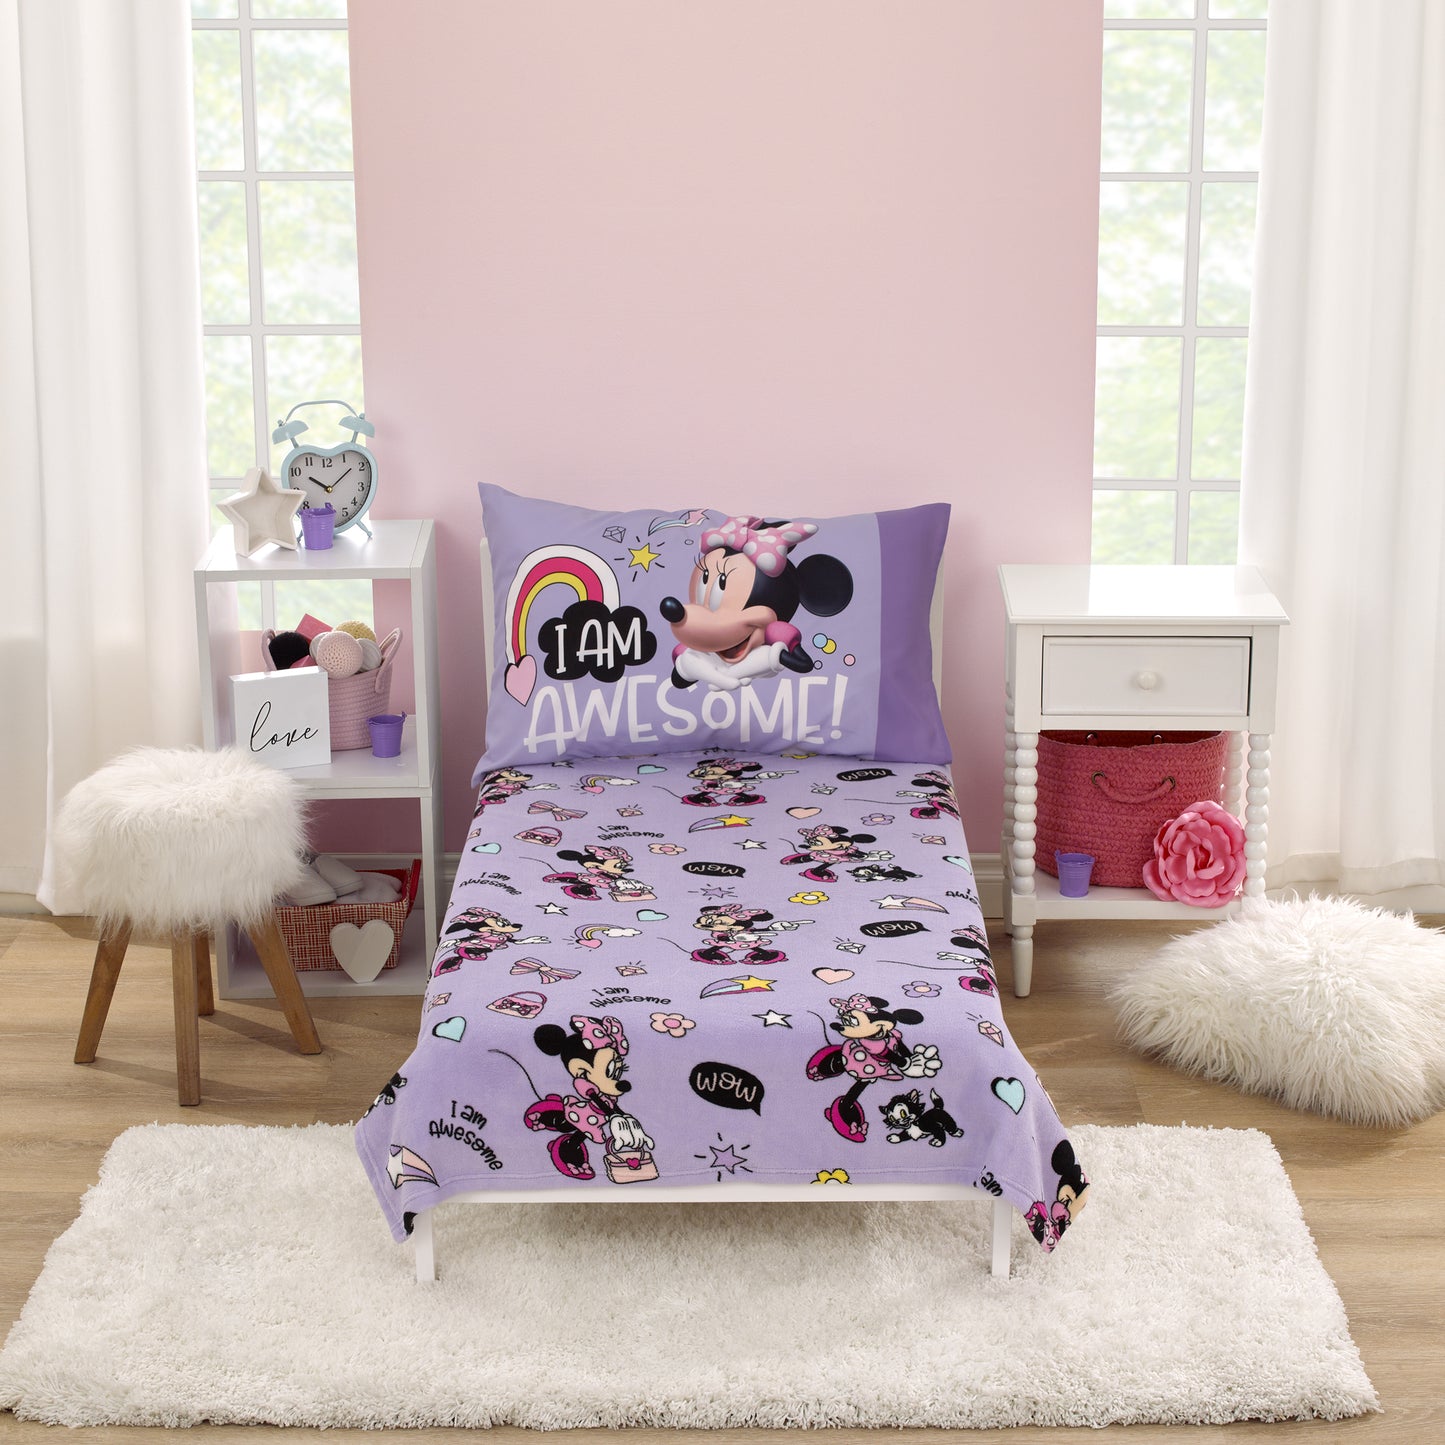 Disney Minnie Mouse I am Awesome Lavender and Pink, Daisy Duck, Rainbow Hearts and Stars Super Soft Toddler Blanket